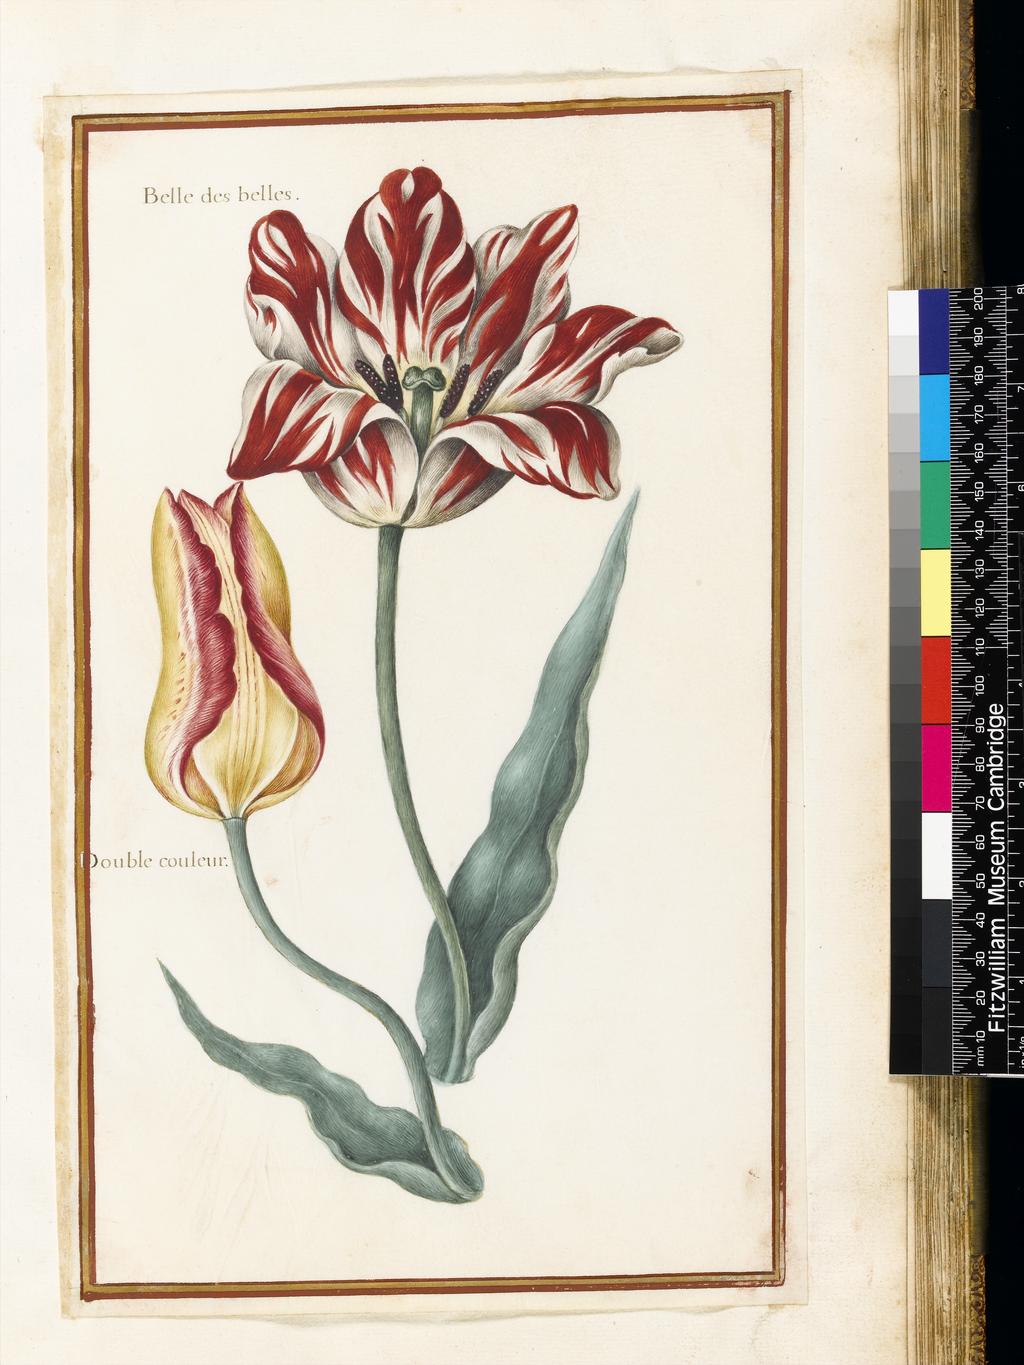 An image of Two varieties of 'broken' Tulips. Robert, Nicolas attributed to (French, 1614-1685). Graphite, watercolour and bodycolour on vellum, height 320 mm, width 195 mm. Album containing 62 botanical drawings on vellum tipped in on the gilt-edged pages of the album which bear the watermark of an 18th century French paper-maker, Malmenayde of Thiers (active from 1731). Bound in red morocco with clasps, the spine tooled in gilt. The Pages are interleaved with thin protective paper. Ruled lines of red and gold border the drawings on all sides. 17th Century. French.